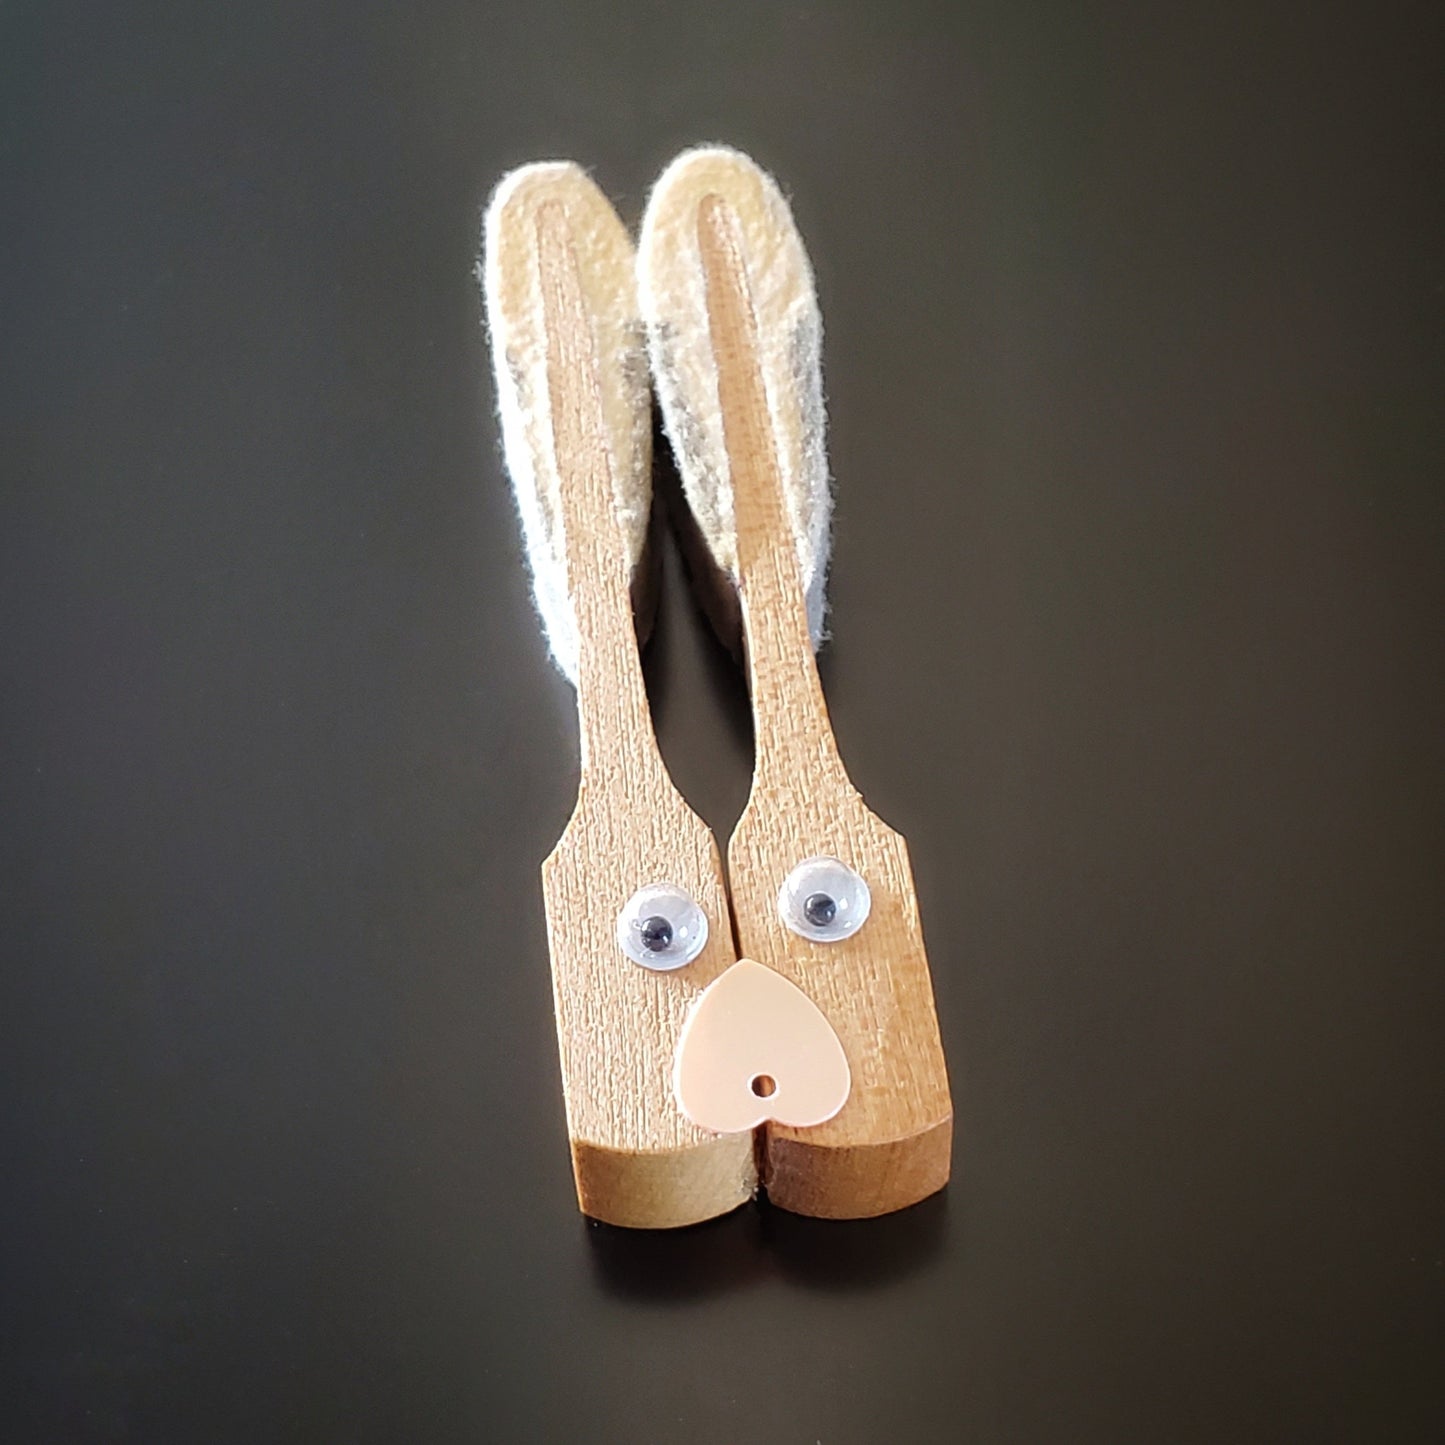 magnet in the shape of a bunny's head - made from 2 upcycled piano hammers